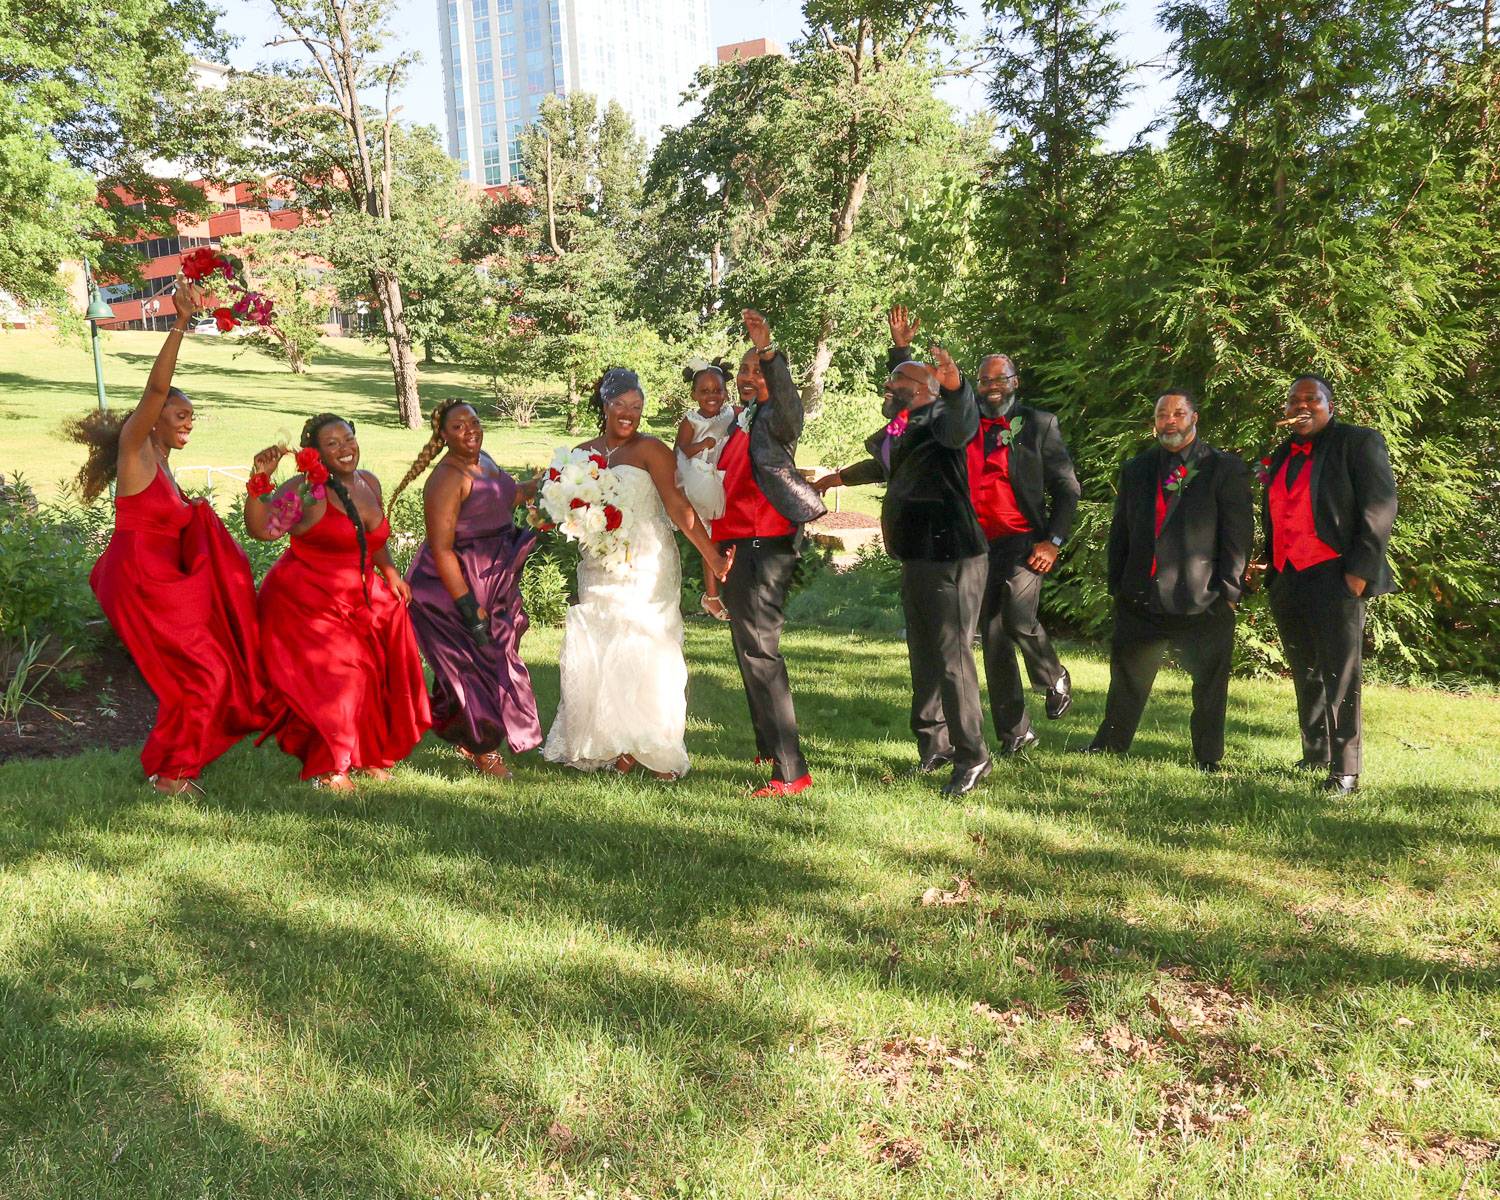 The newlyweds and their attendants jumping on grass